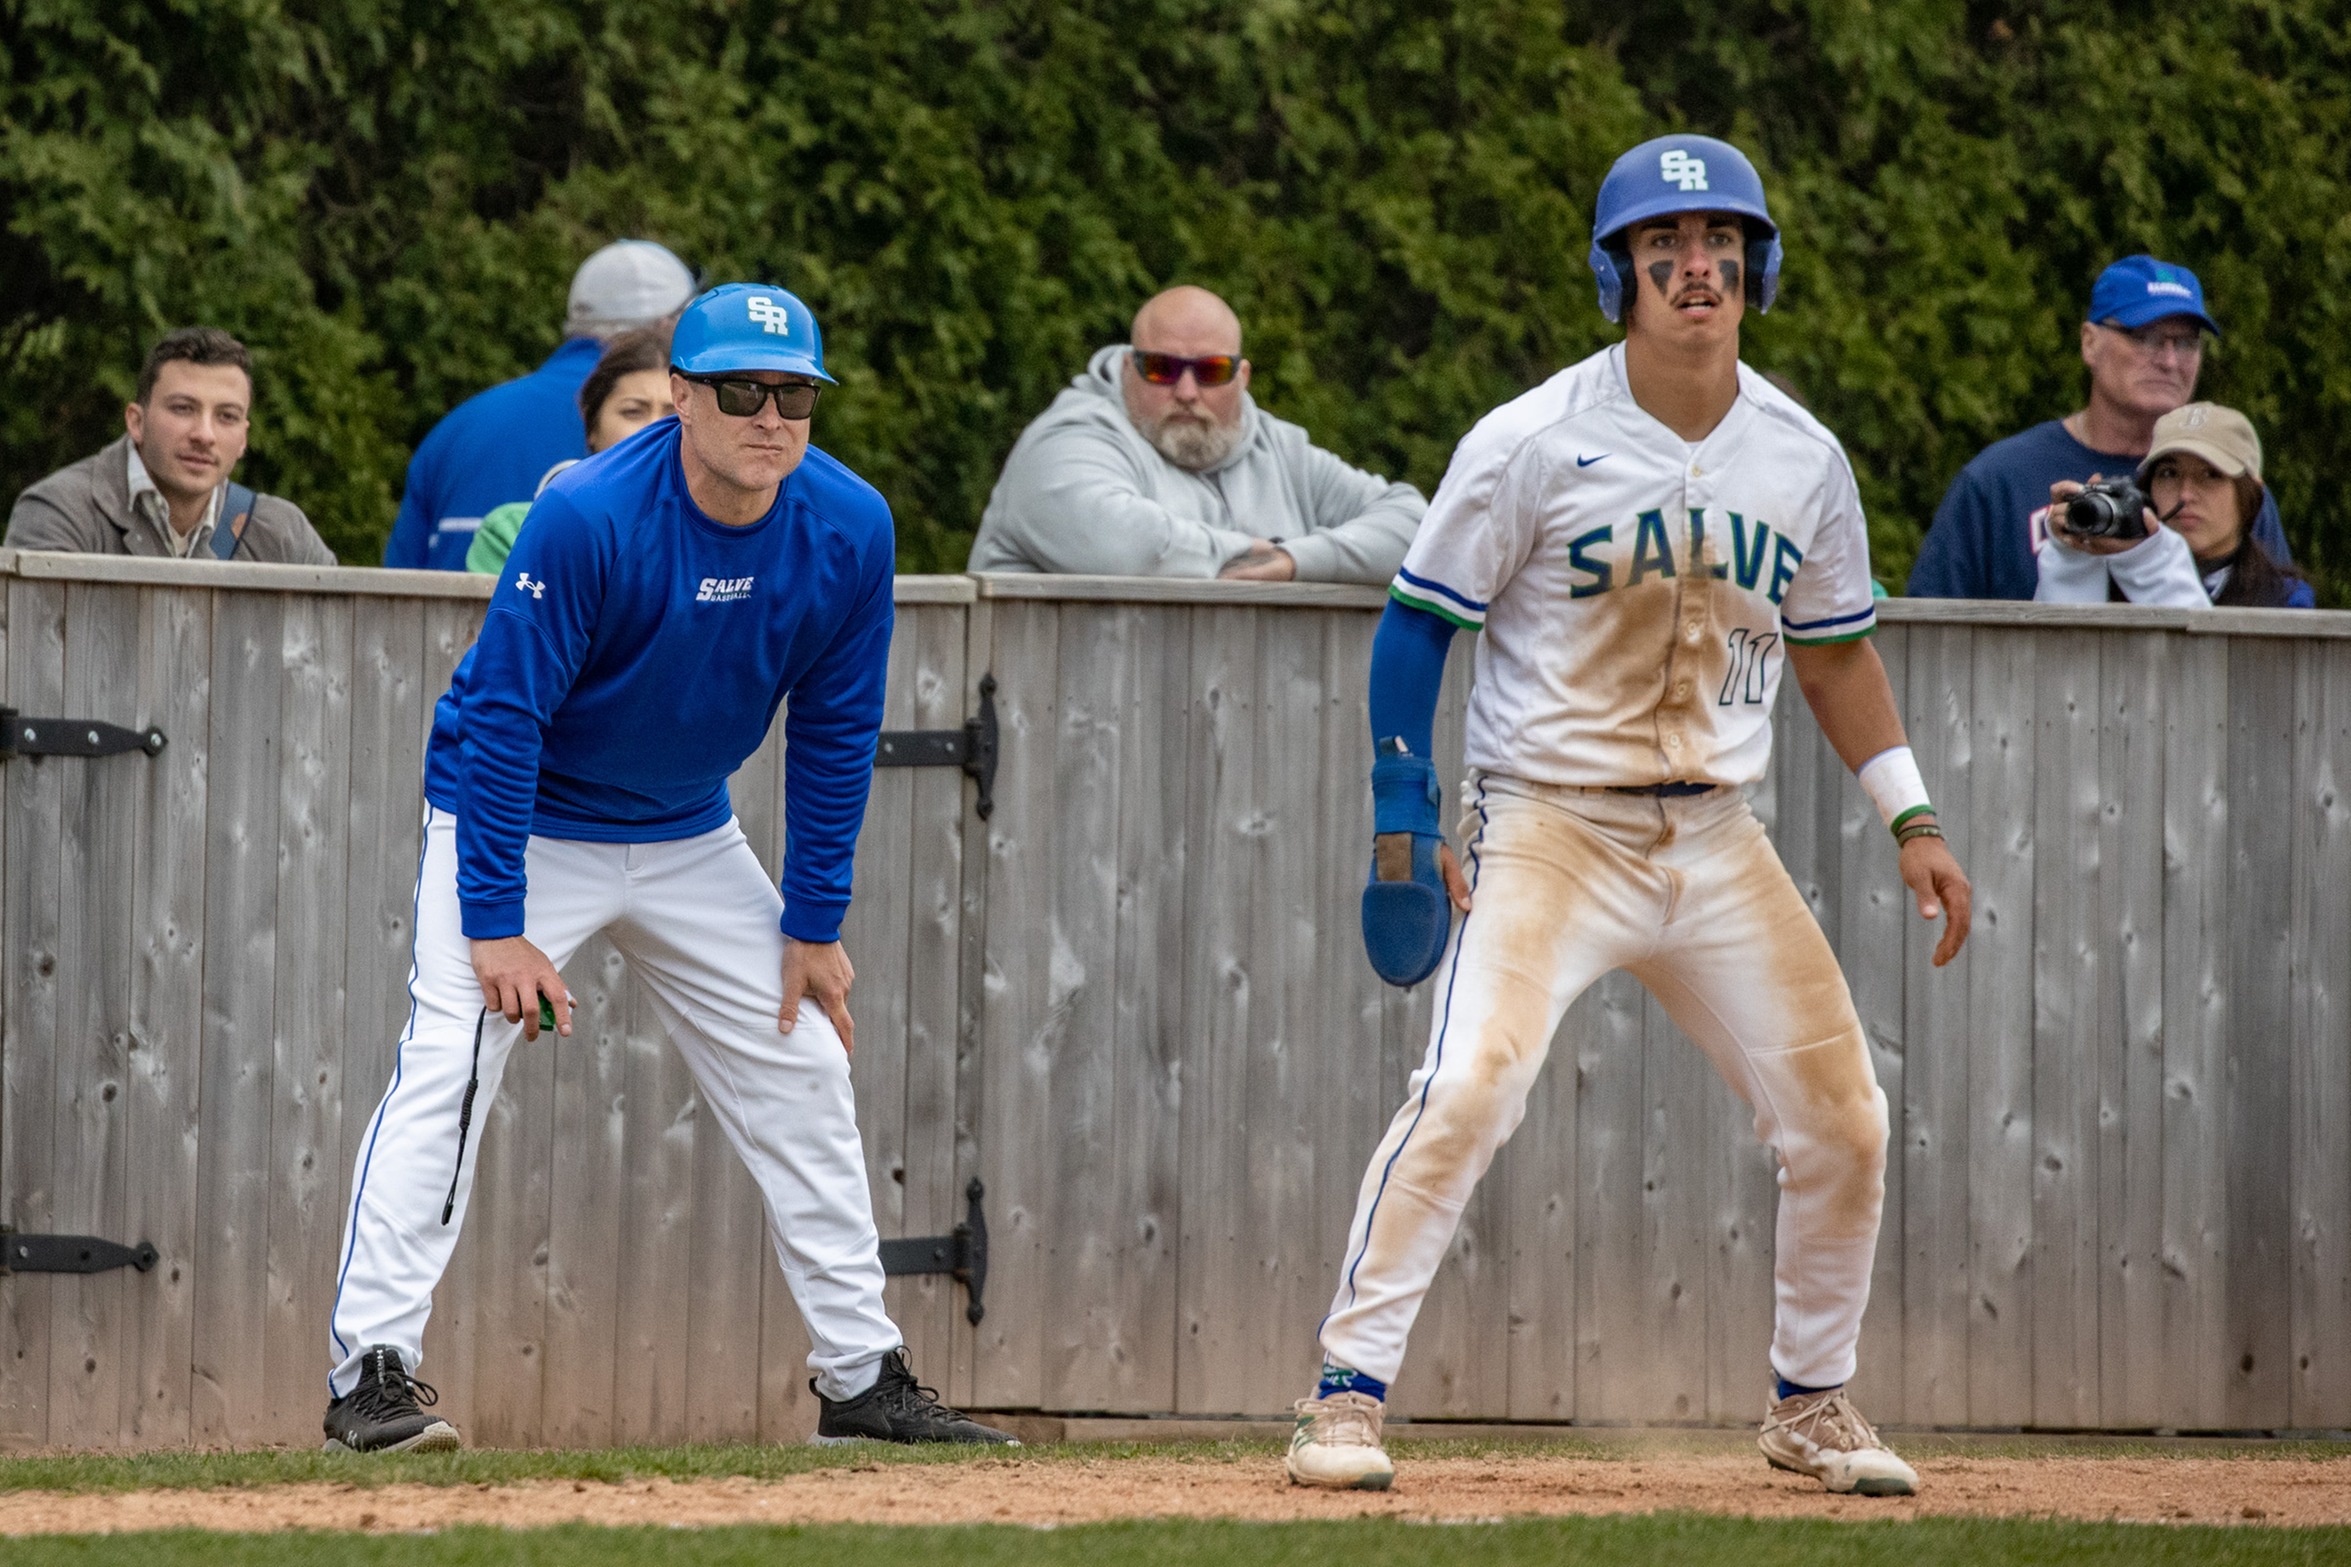 Homa and Siqueira Go Deep, Seahawks Sweep Rams for Tenth Straight Win